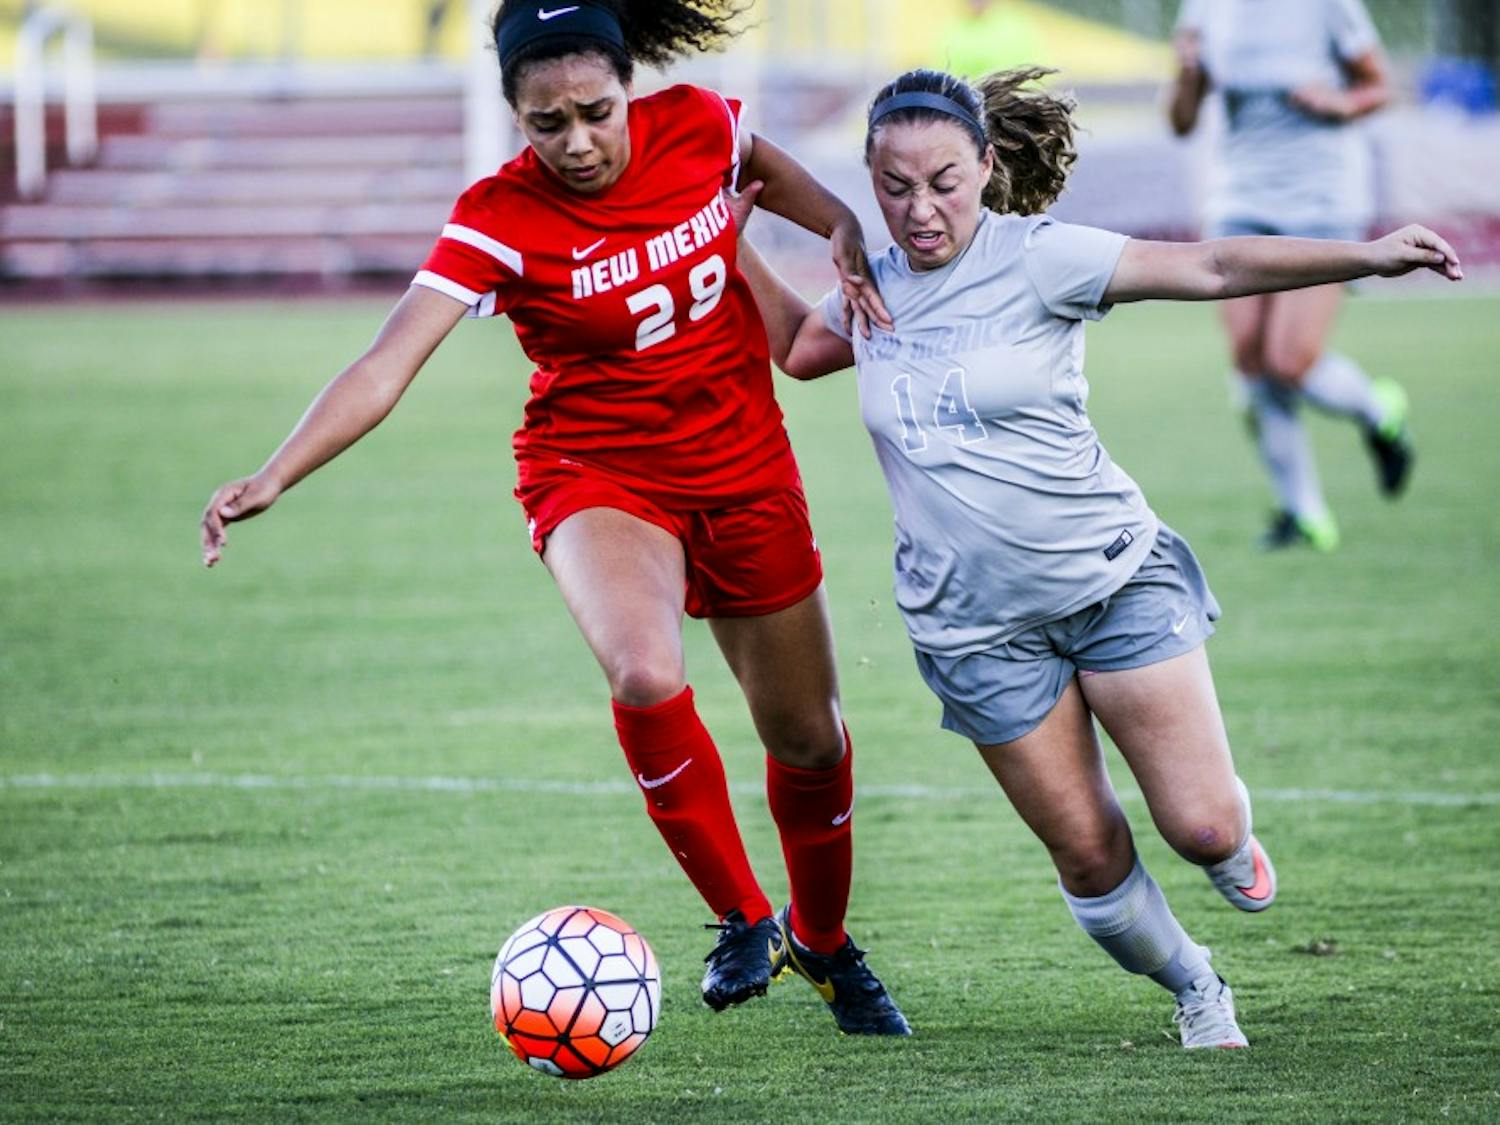 Junior midfielder Claire Lynch, right, attempts to steal the ball from freshman defender Avadney Osbourne Thursday August 11, 2016 at the UNM Soccer Complex. The Lobos played their annual Cherry versus Silver match.